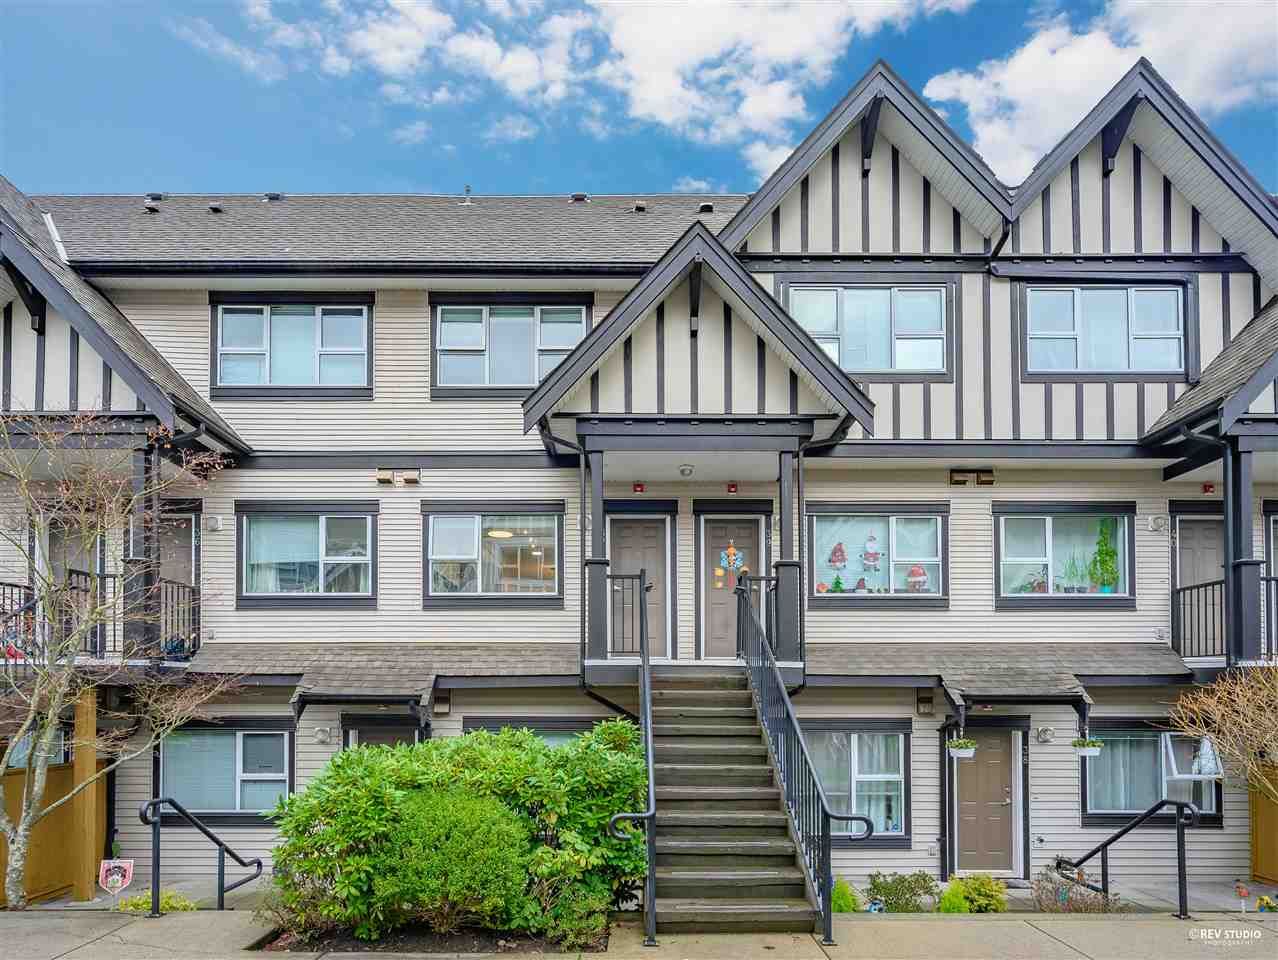 Main Photo: 37 730 FARROW STREET in Coquitlam: Coquitlam West Townhouse for sale : MLS®# R2528929